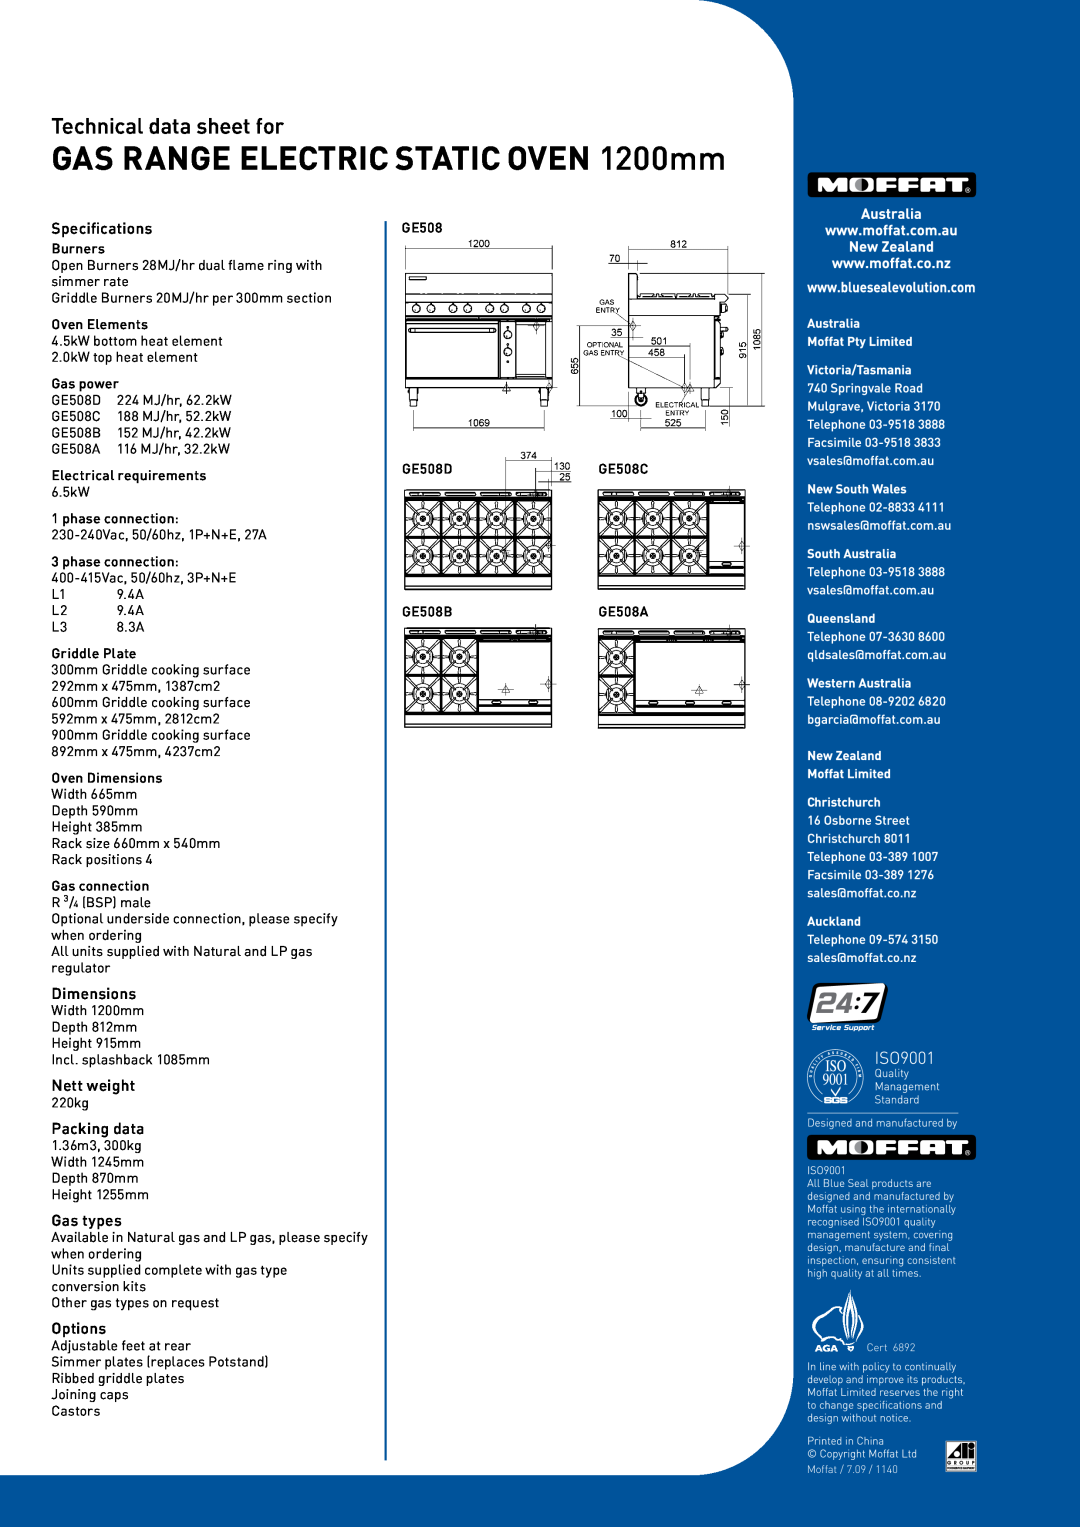 Moffat GE508B, GE508A Specifications, Dimensions, Nett weight, Packing data, Gas types, Options, Technical data sheet for 